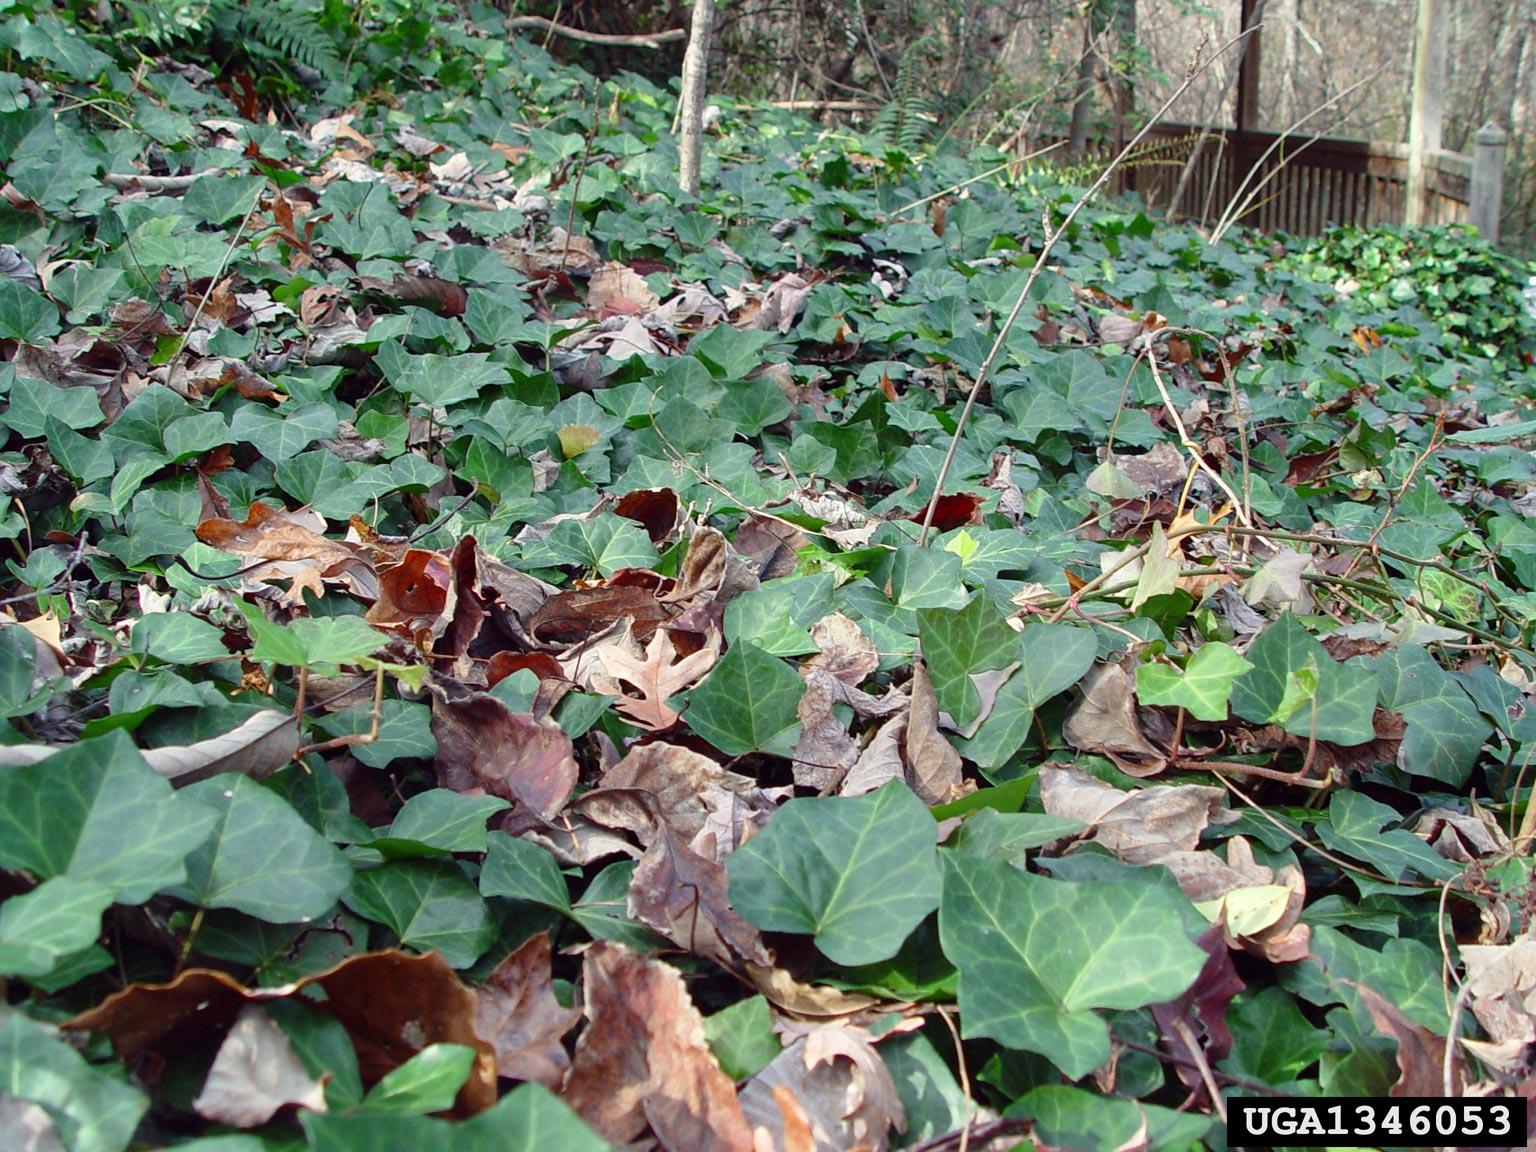 Invasive English ivy leaves covering the ground